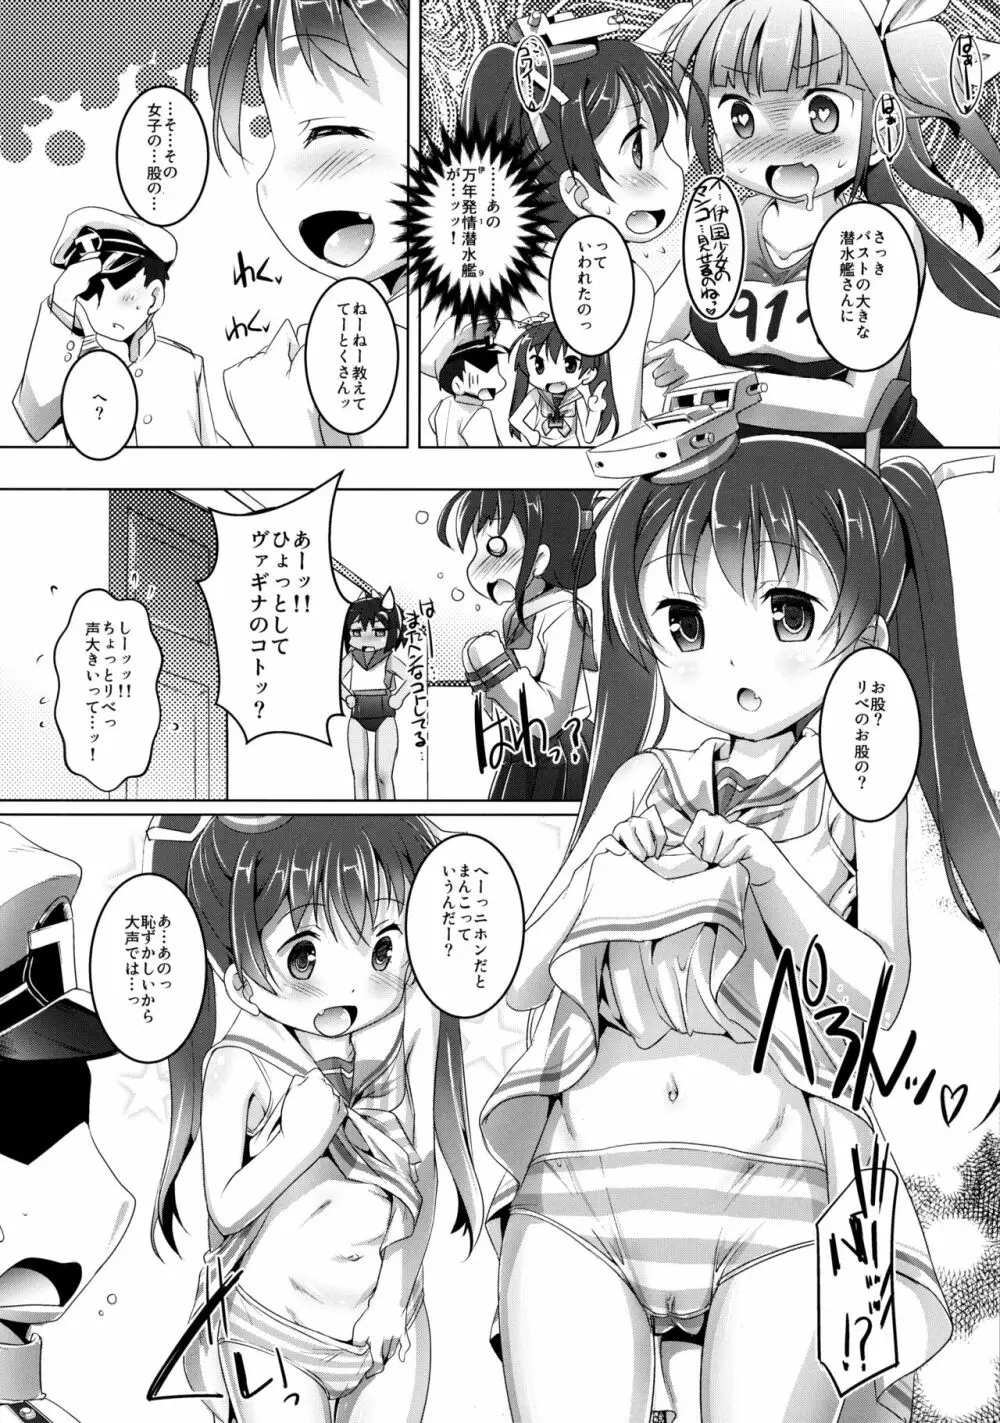 Chaoッちゃお~ - page3